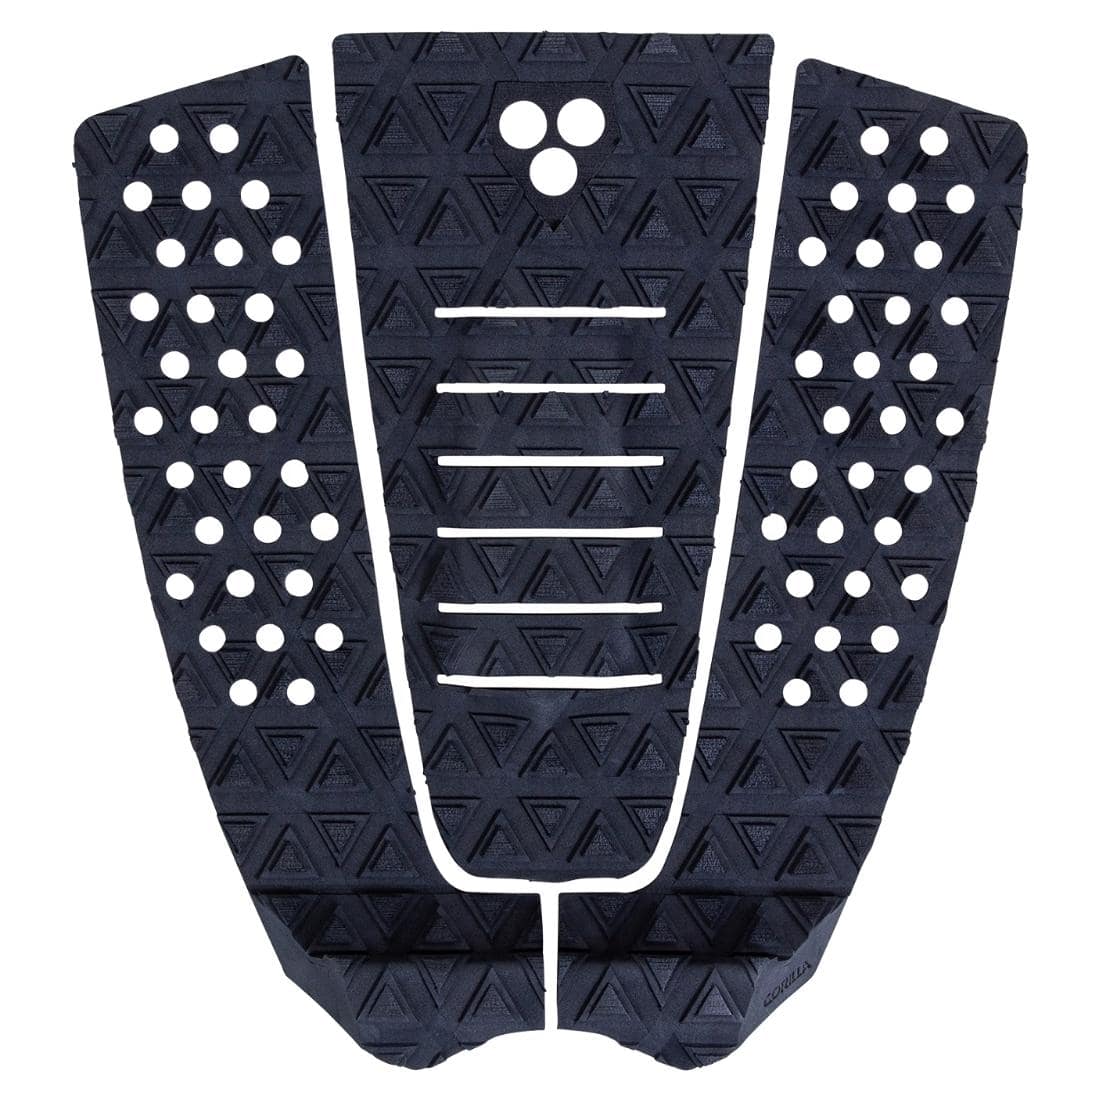 Gorilla Surf The Jane Surfboard Tail Pad - Slate - 3 Piece Tail Pad by Gorilla Surf